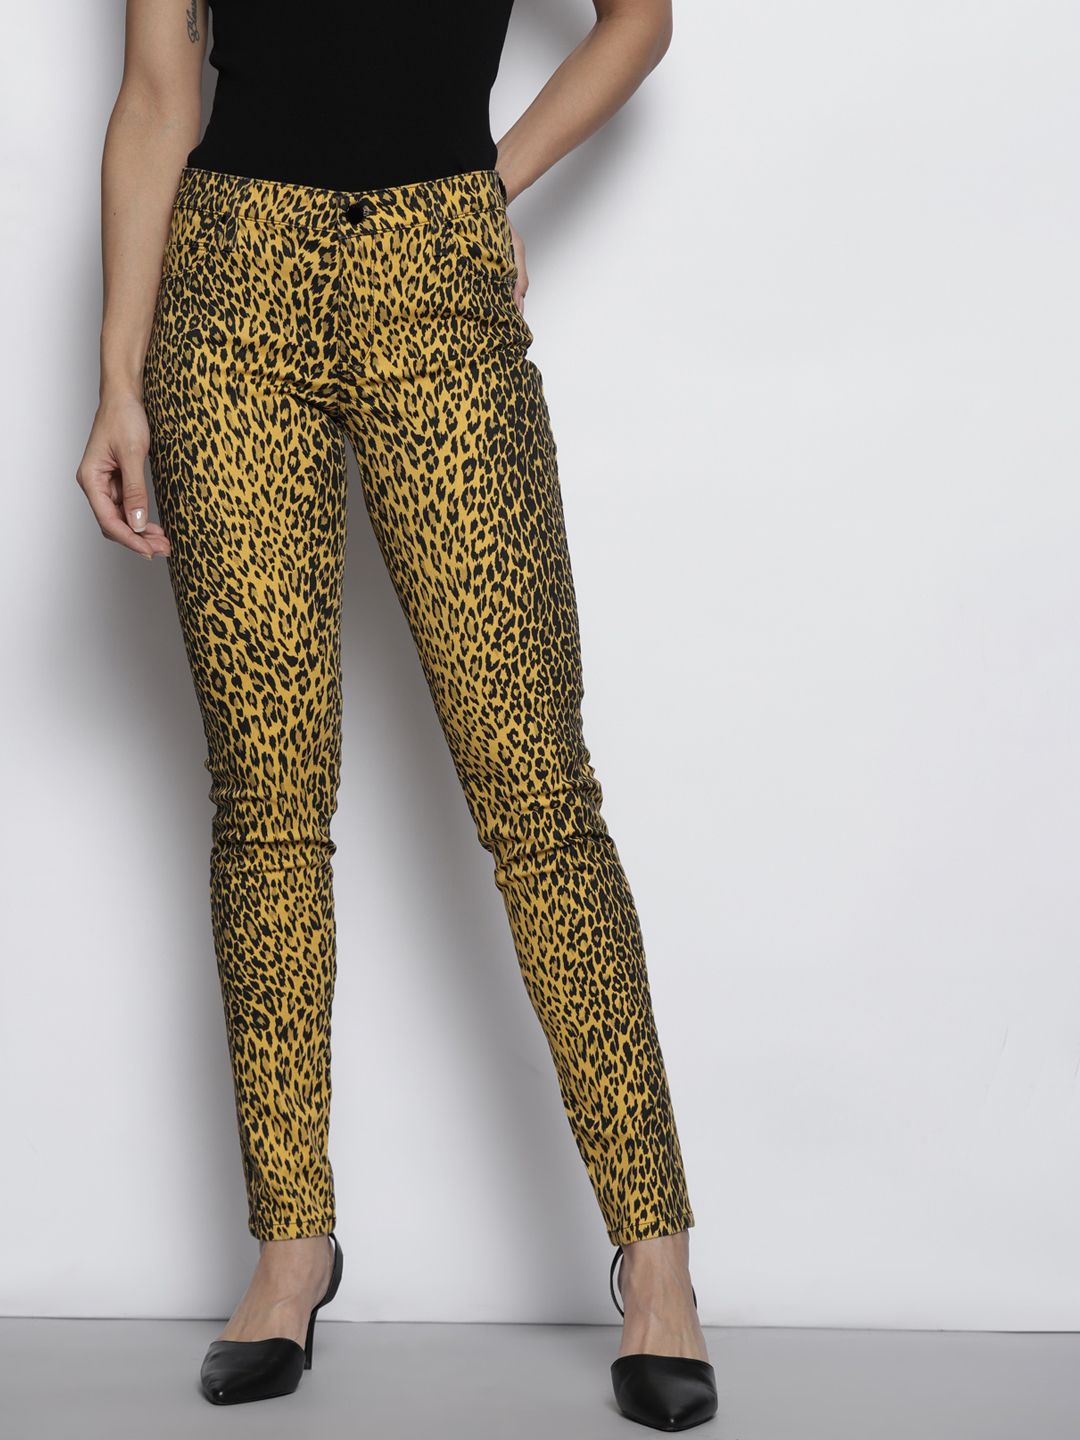 GUESS Women Yellow & Black Leopard Printed Jeans Price in India